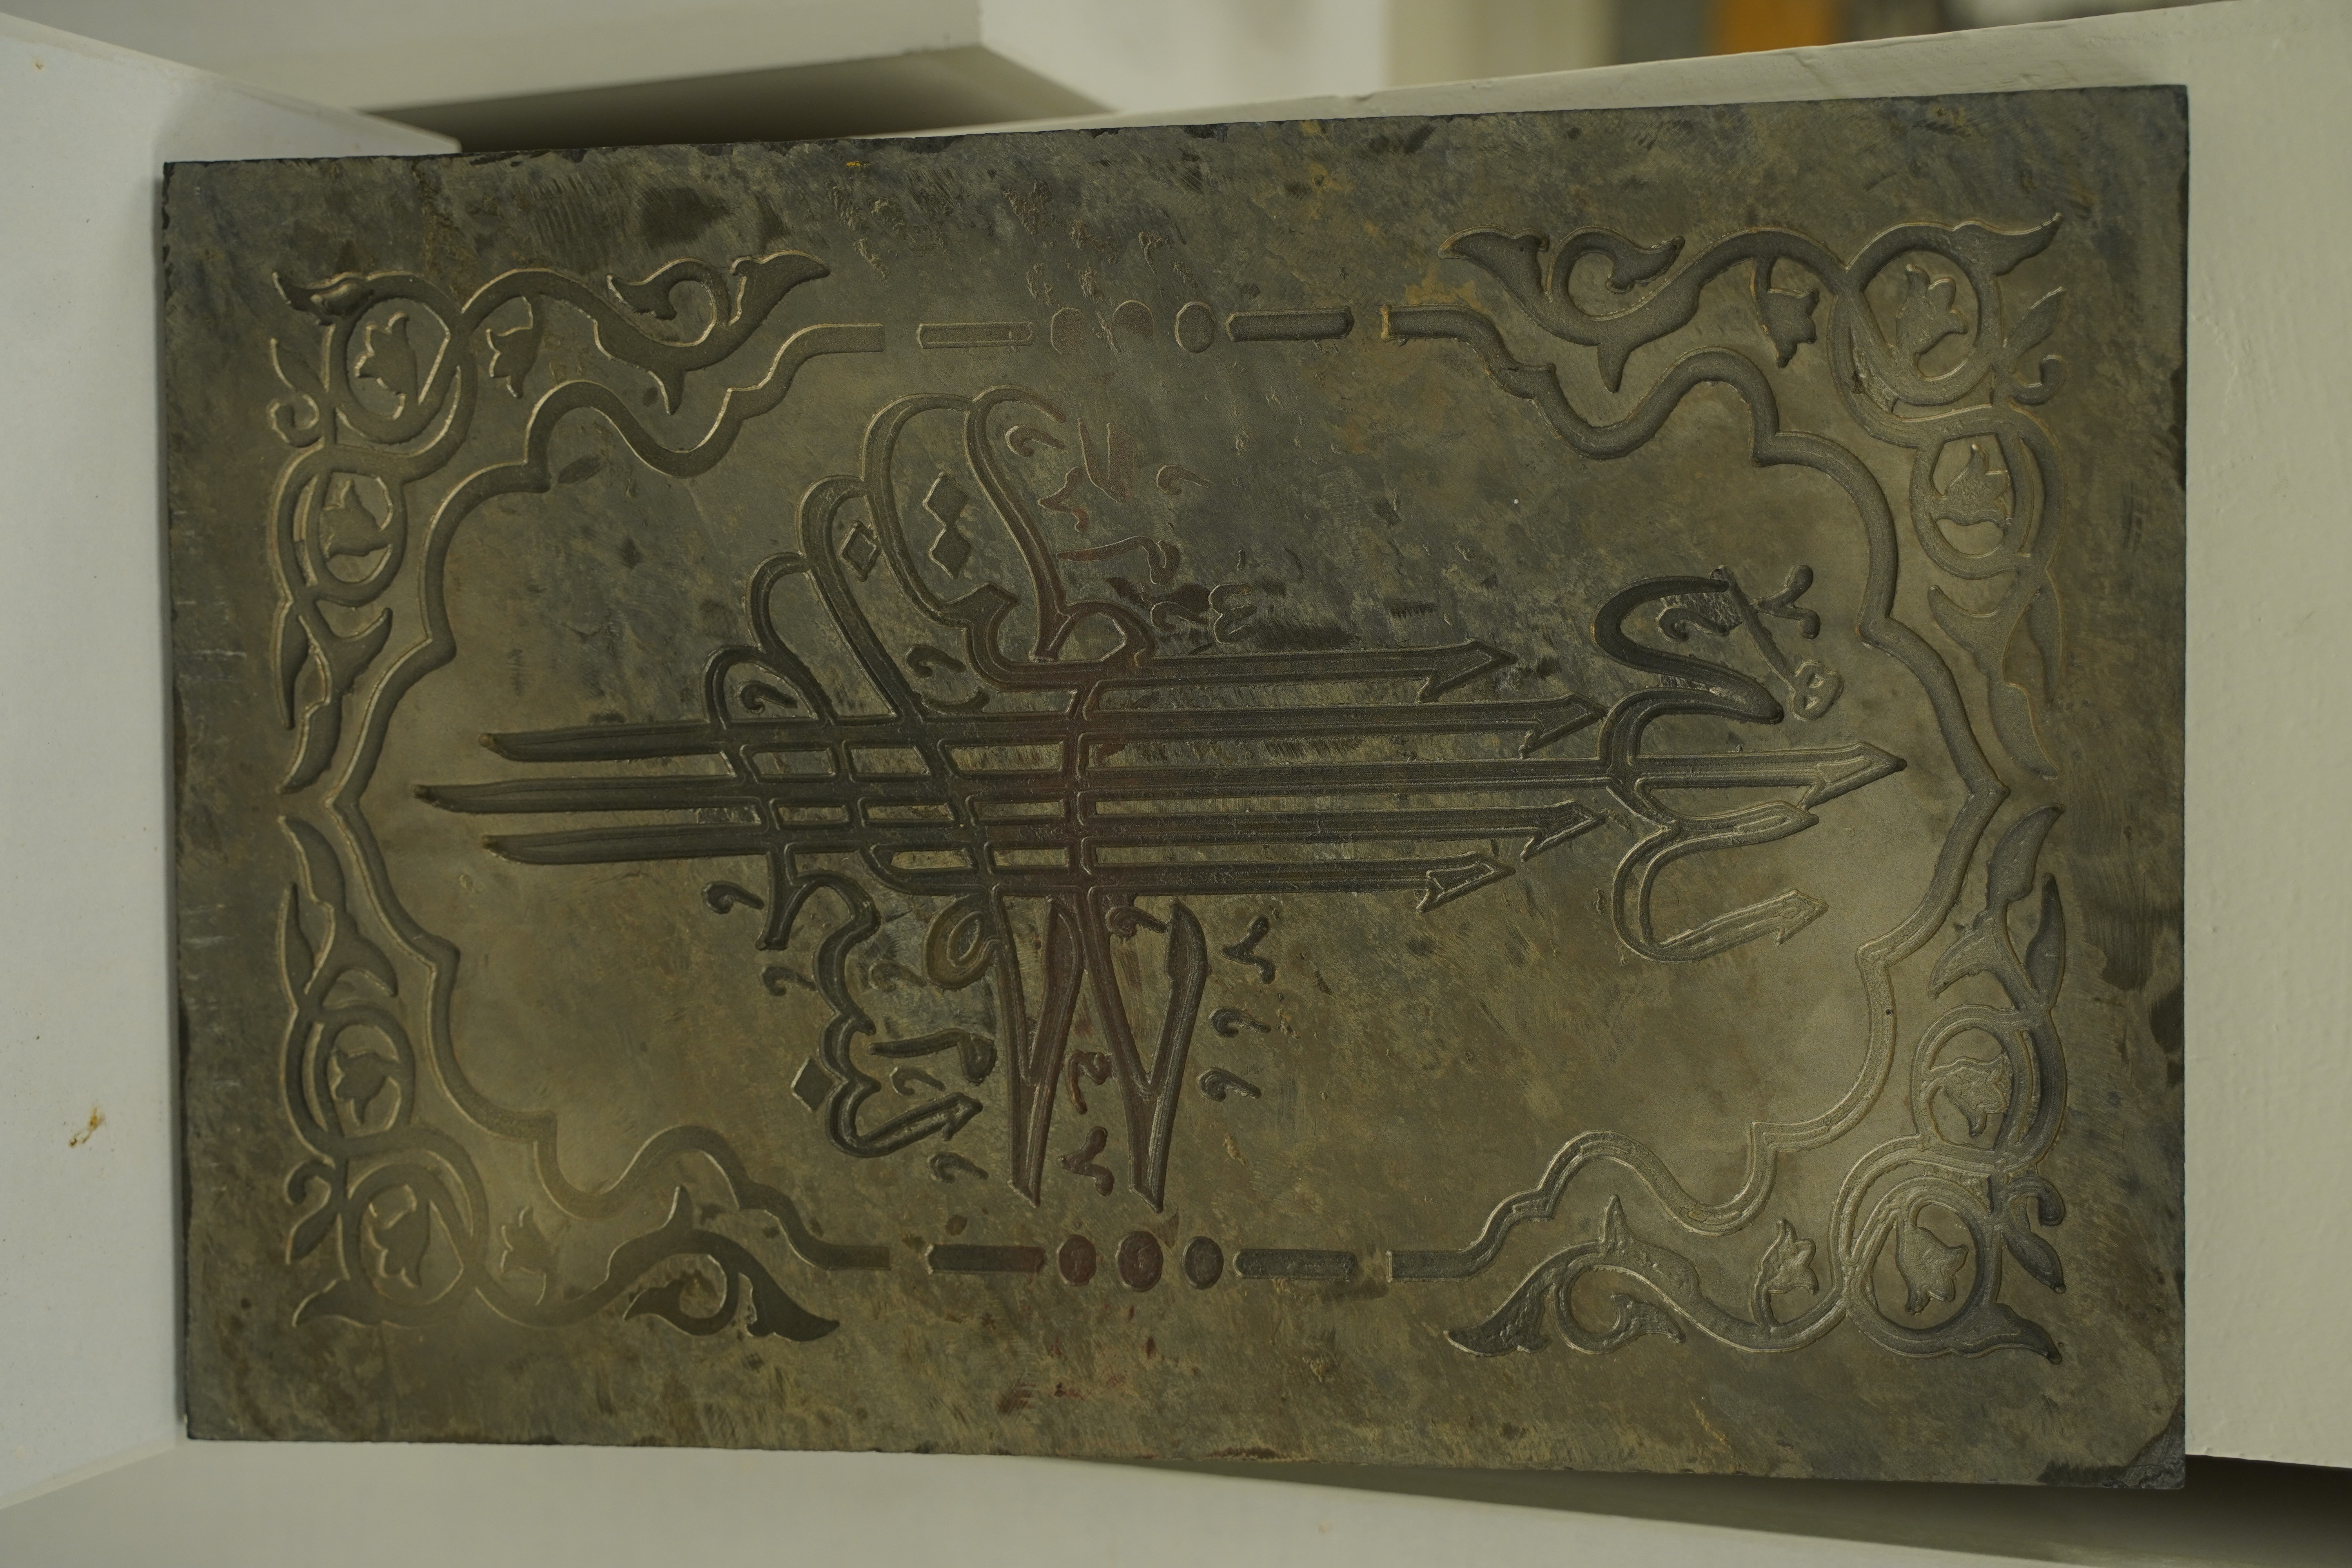 The metallic plate with engraved Arabic calligraphy